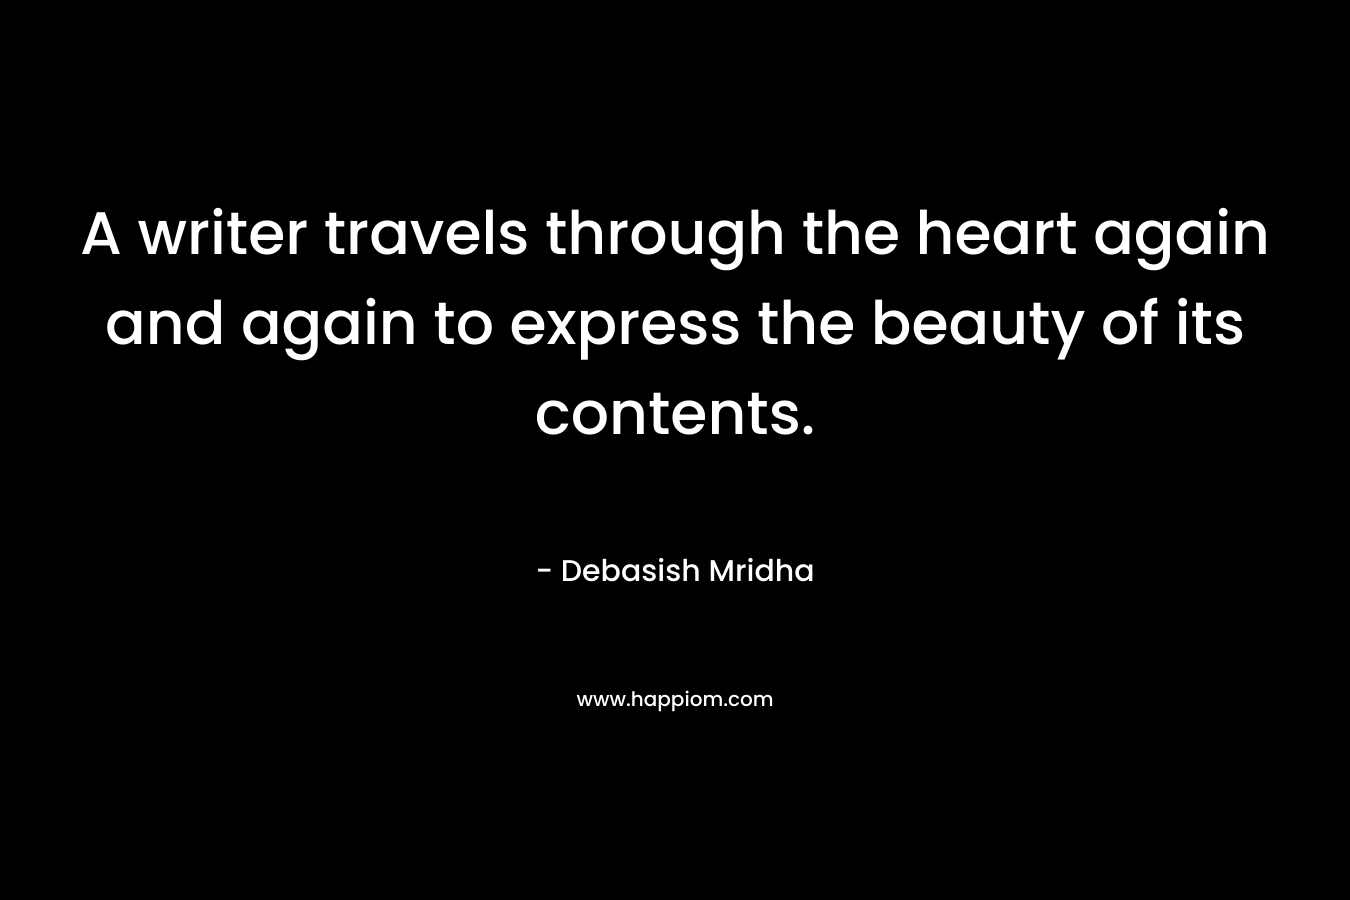 A writer travels through the heart again and again to express the beauty of its contents. – Debasish Mridha